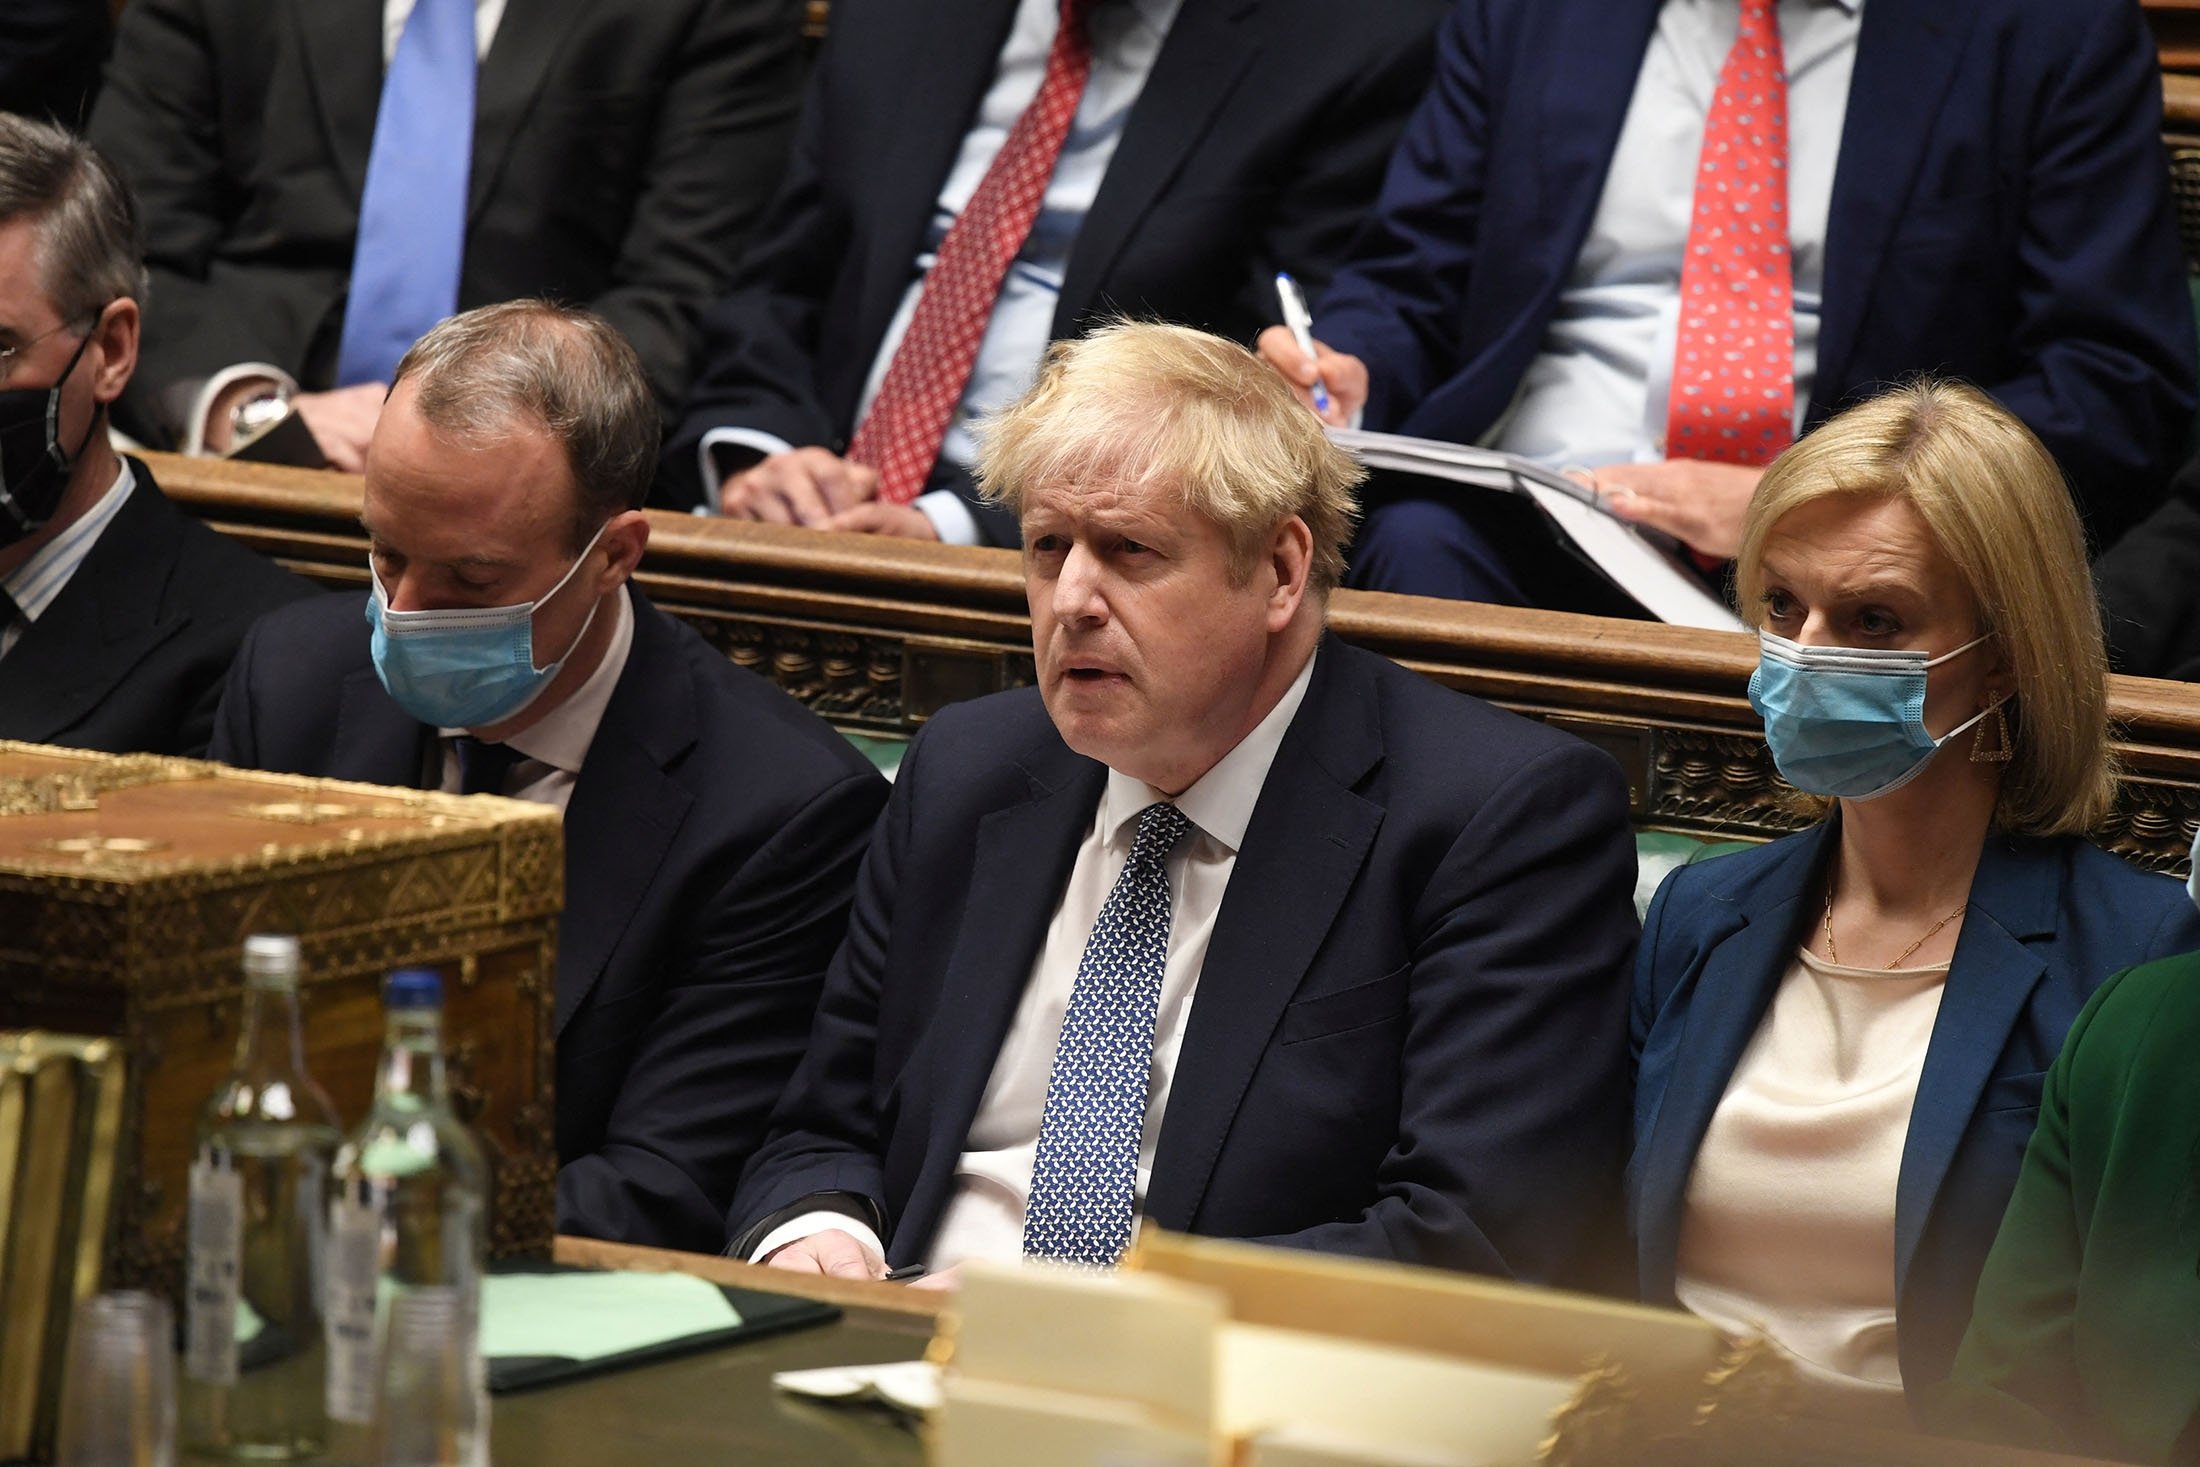 British Prime Minister Boris Johnson attends the weekly Prime Minister's Questions at the parliament in London, U.K., Jan. 12, 2022. (UK Parliament via Reuters)